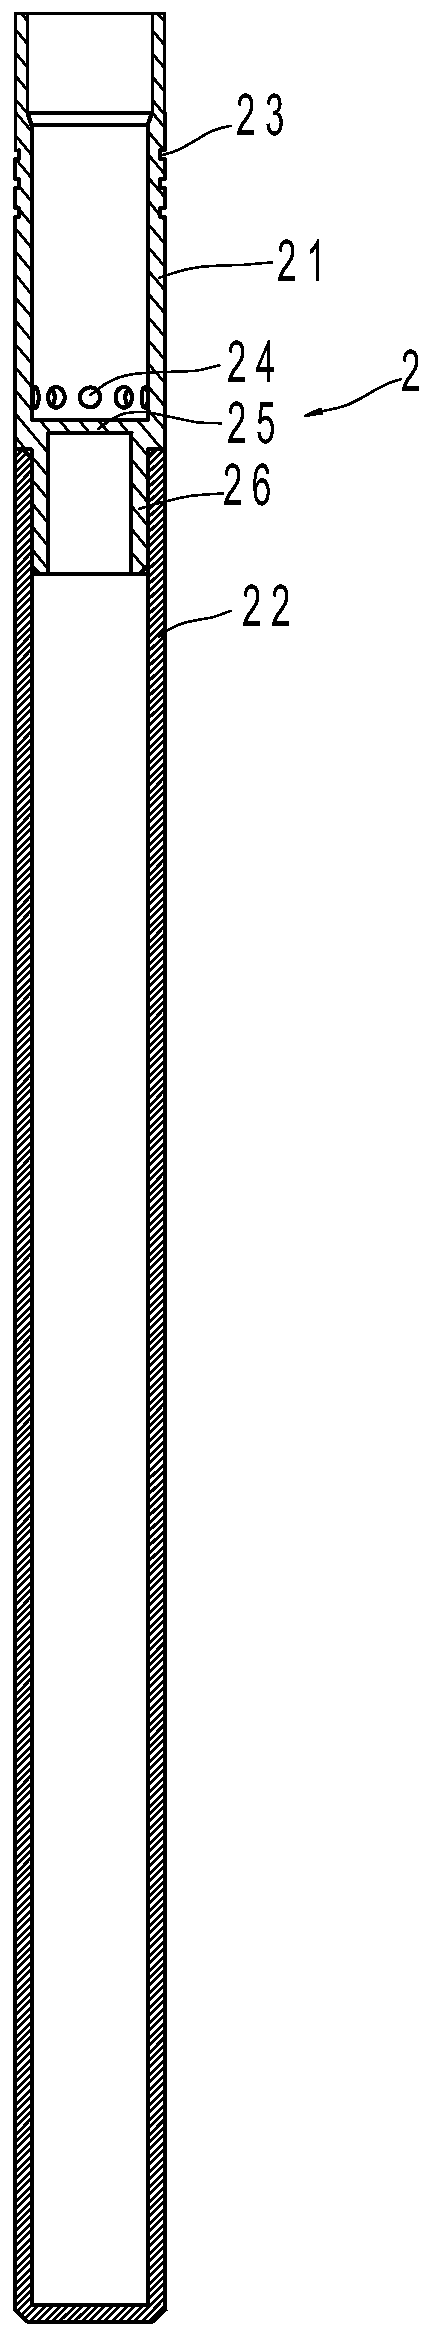 Hollow fiber membrane filter element and packaging method thereof